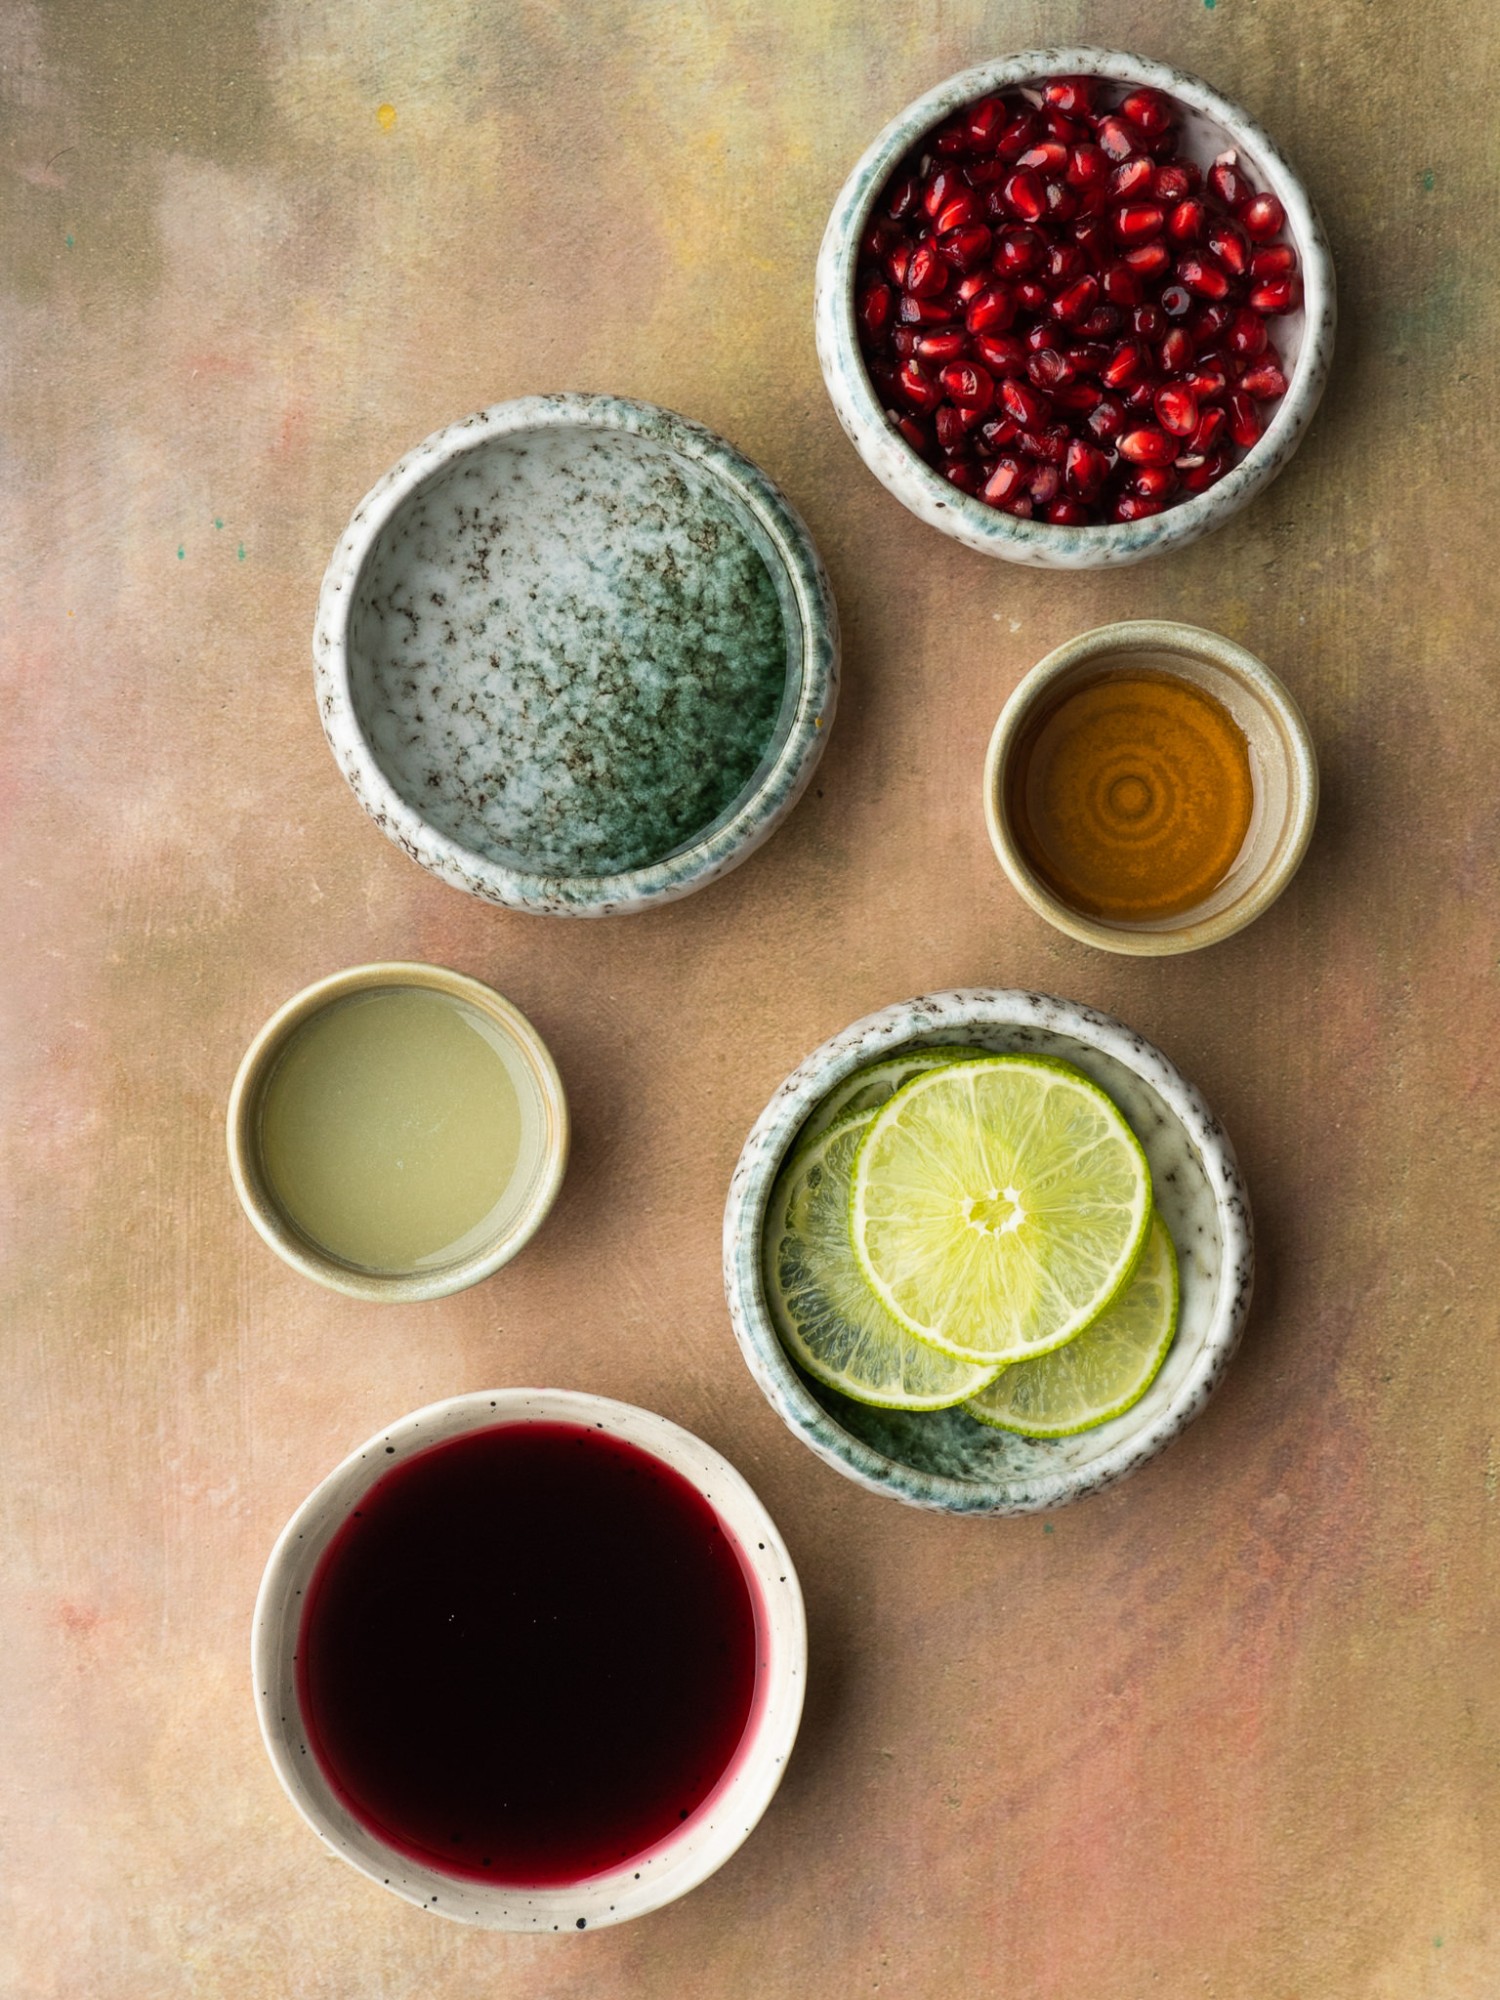 Ingredients for a pomegranate margarita recipe